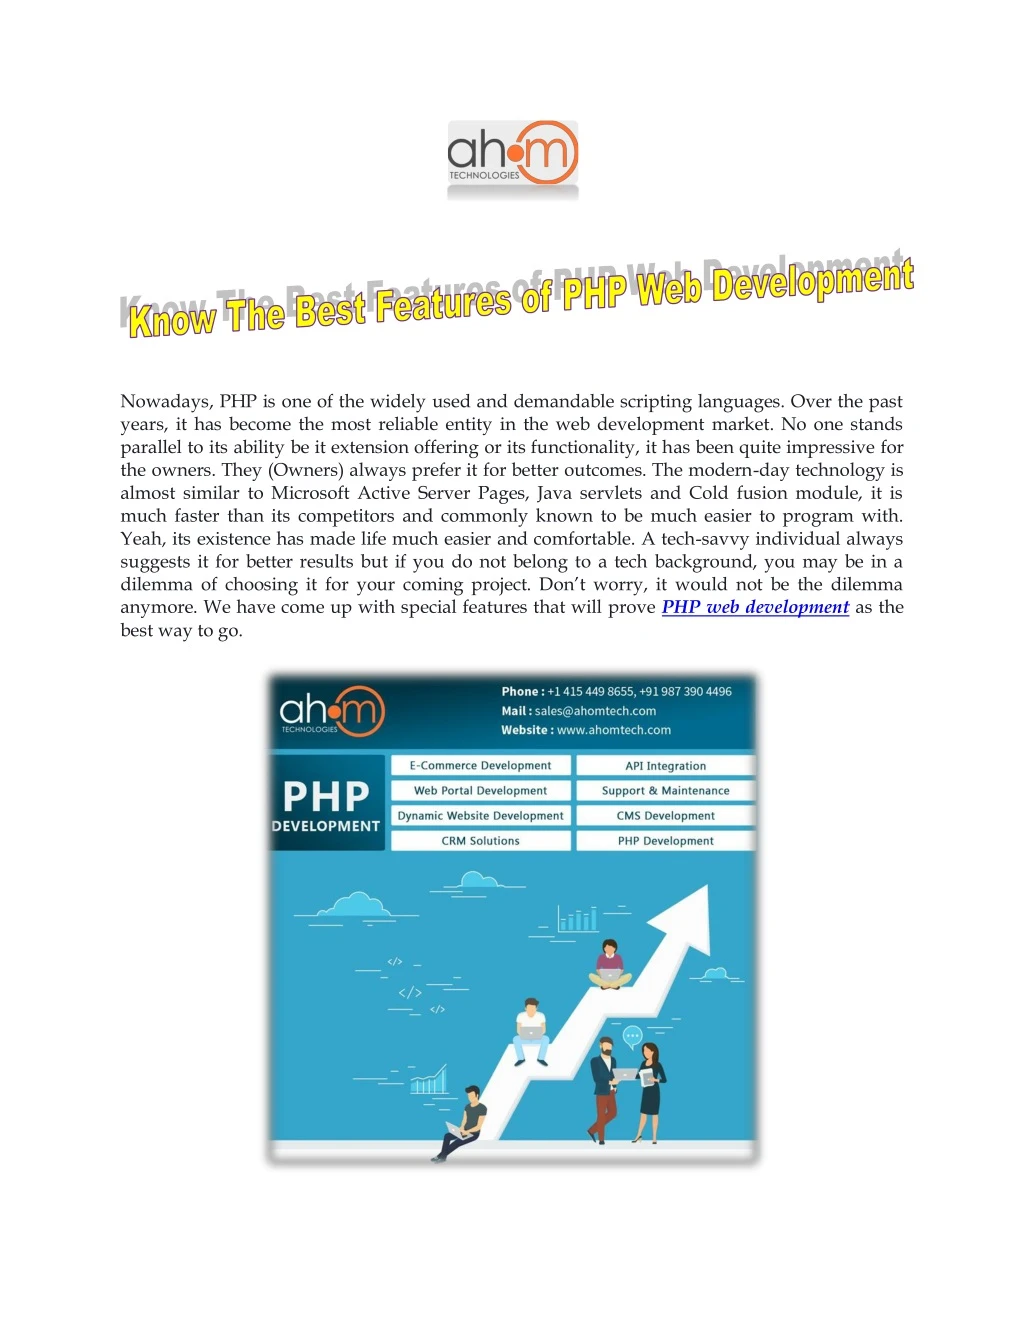 nowadays php is one of the widely used